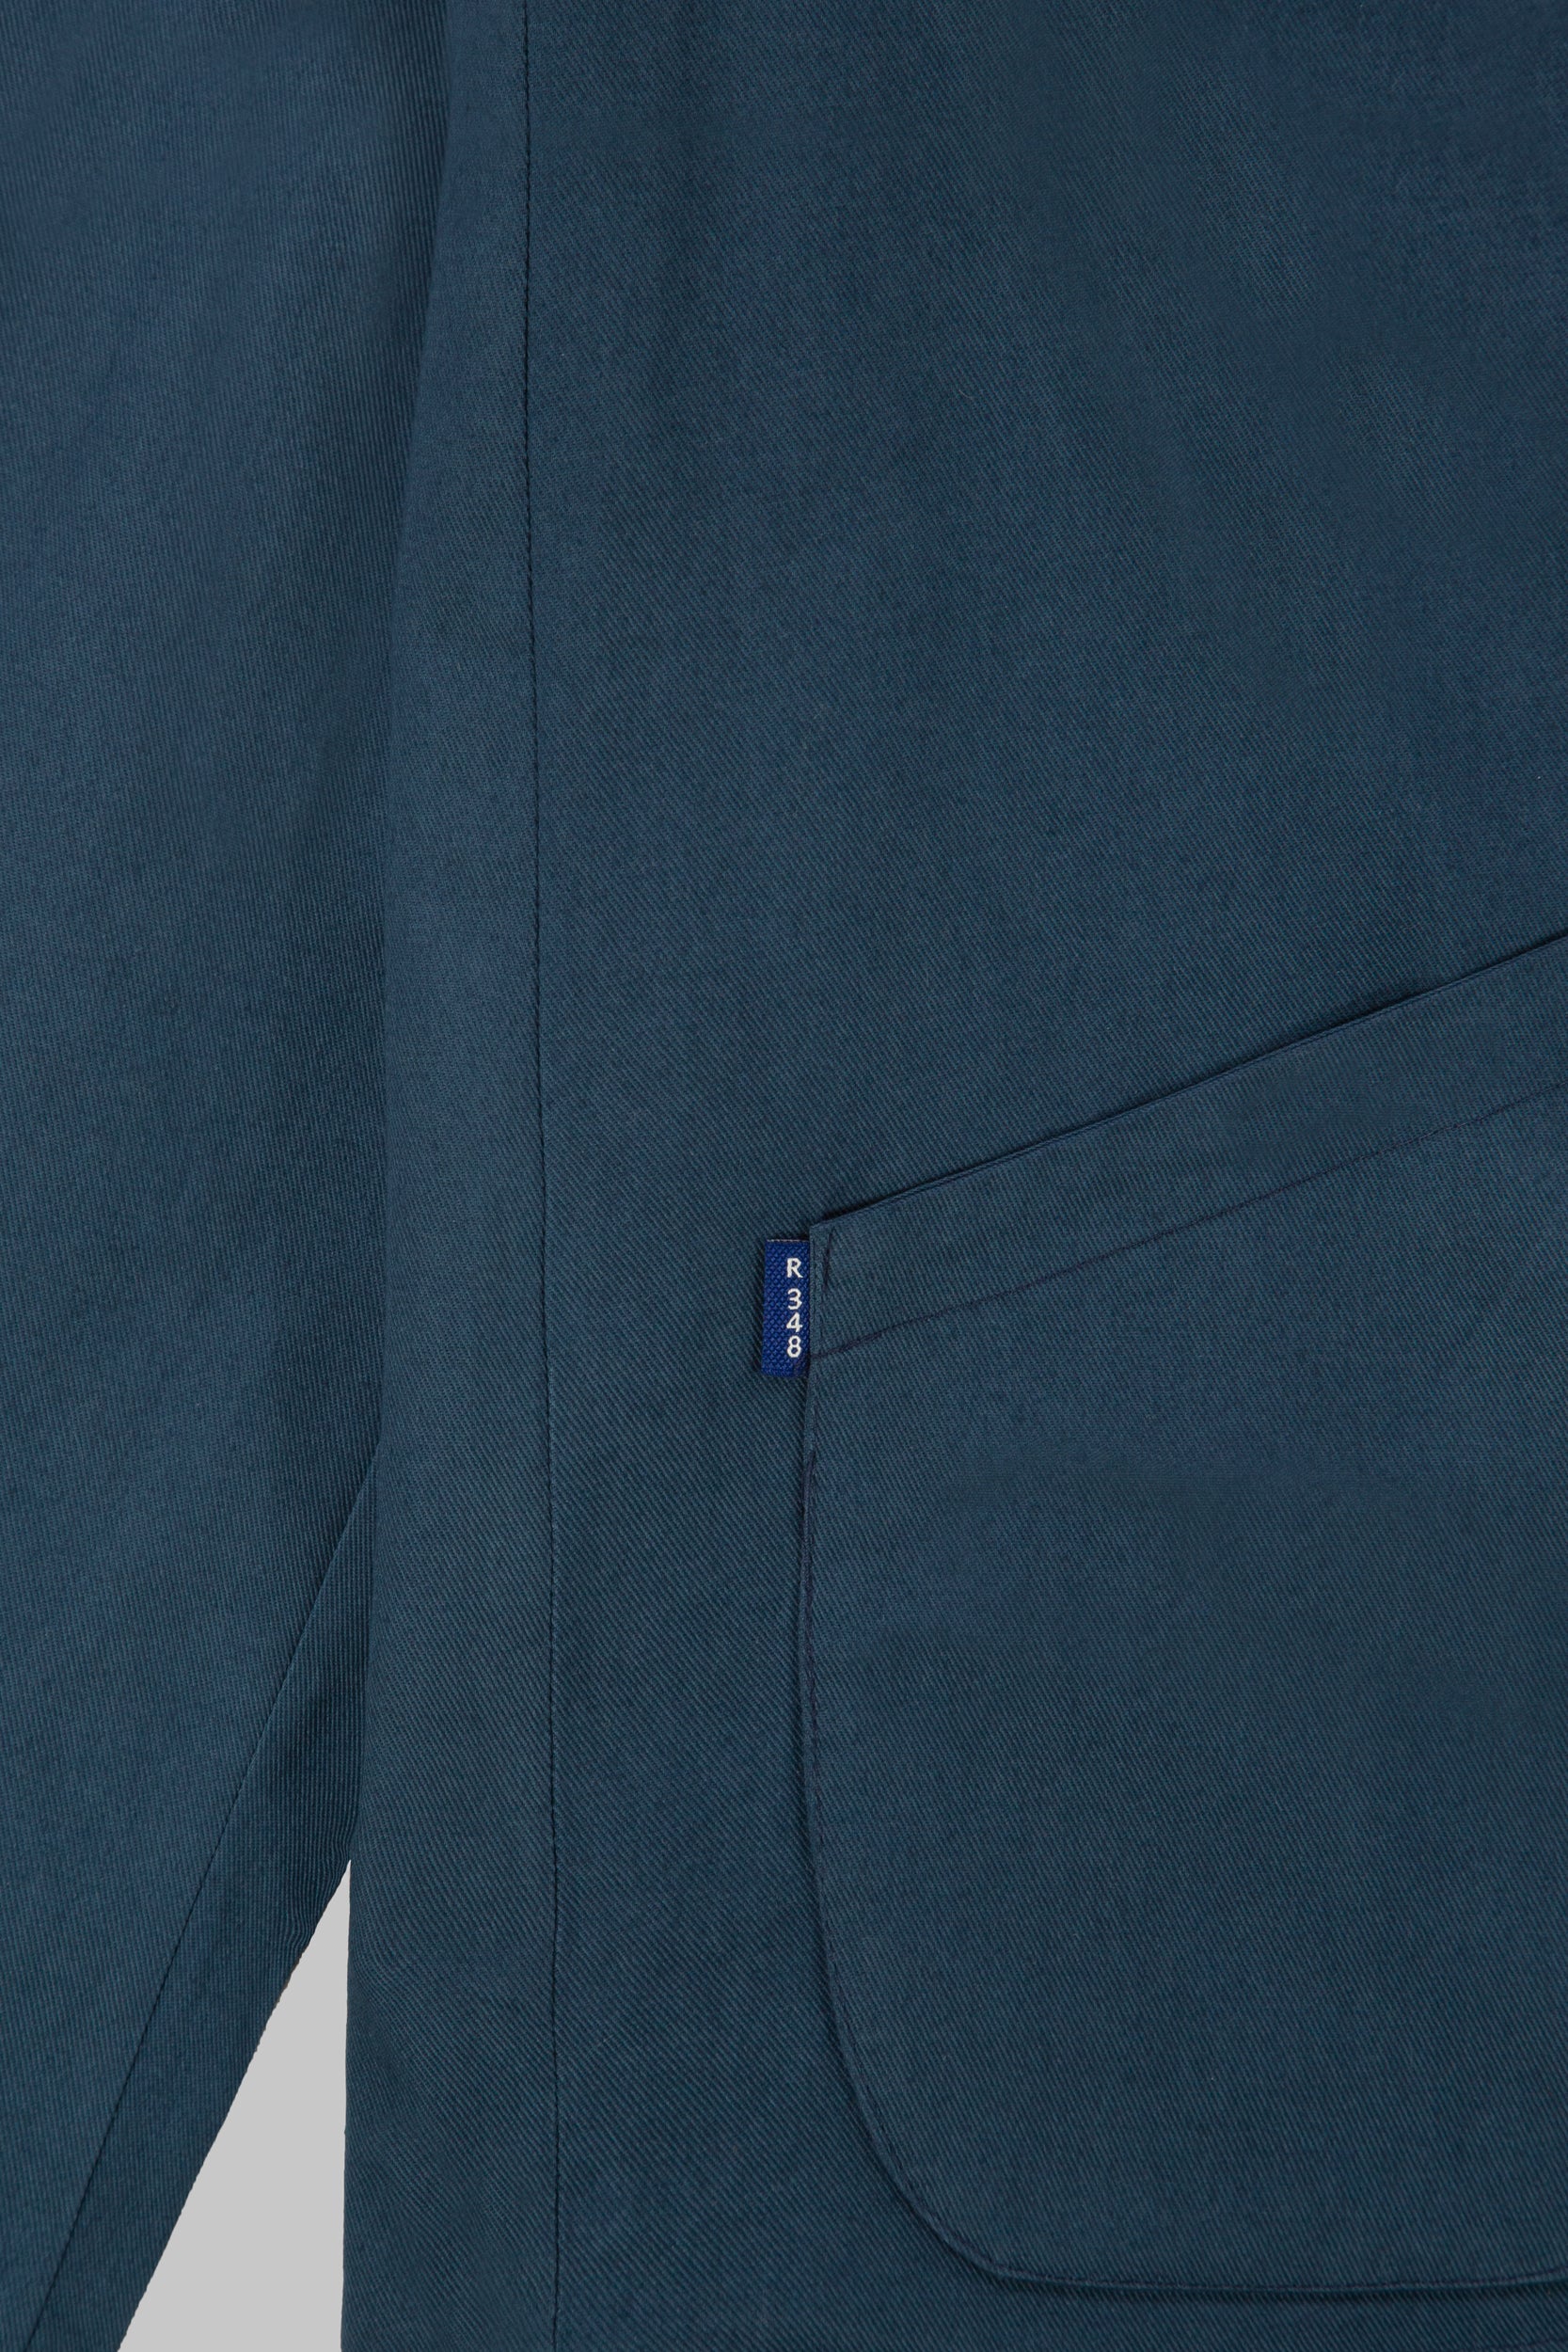 J Smith & Co. Coverall Liner Military Blue